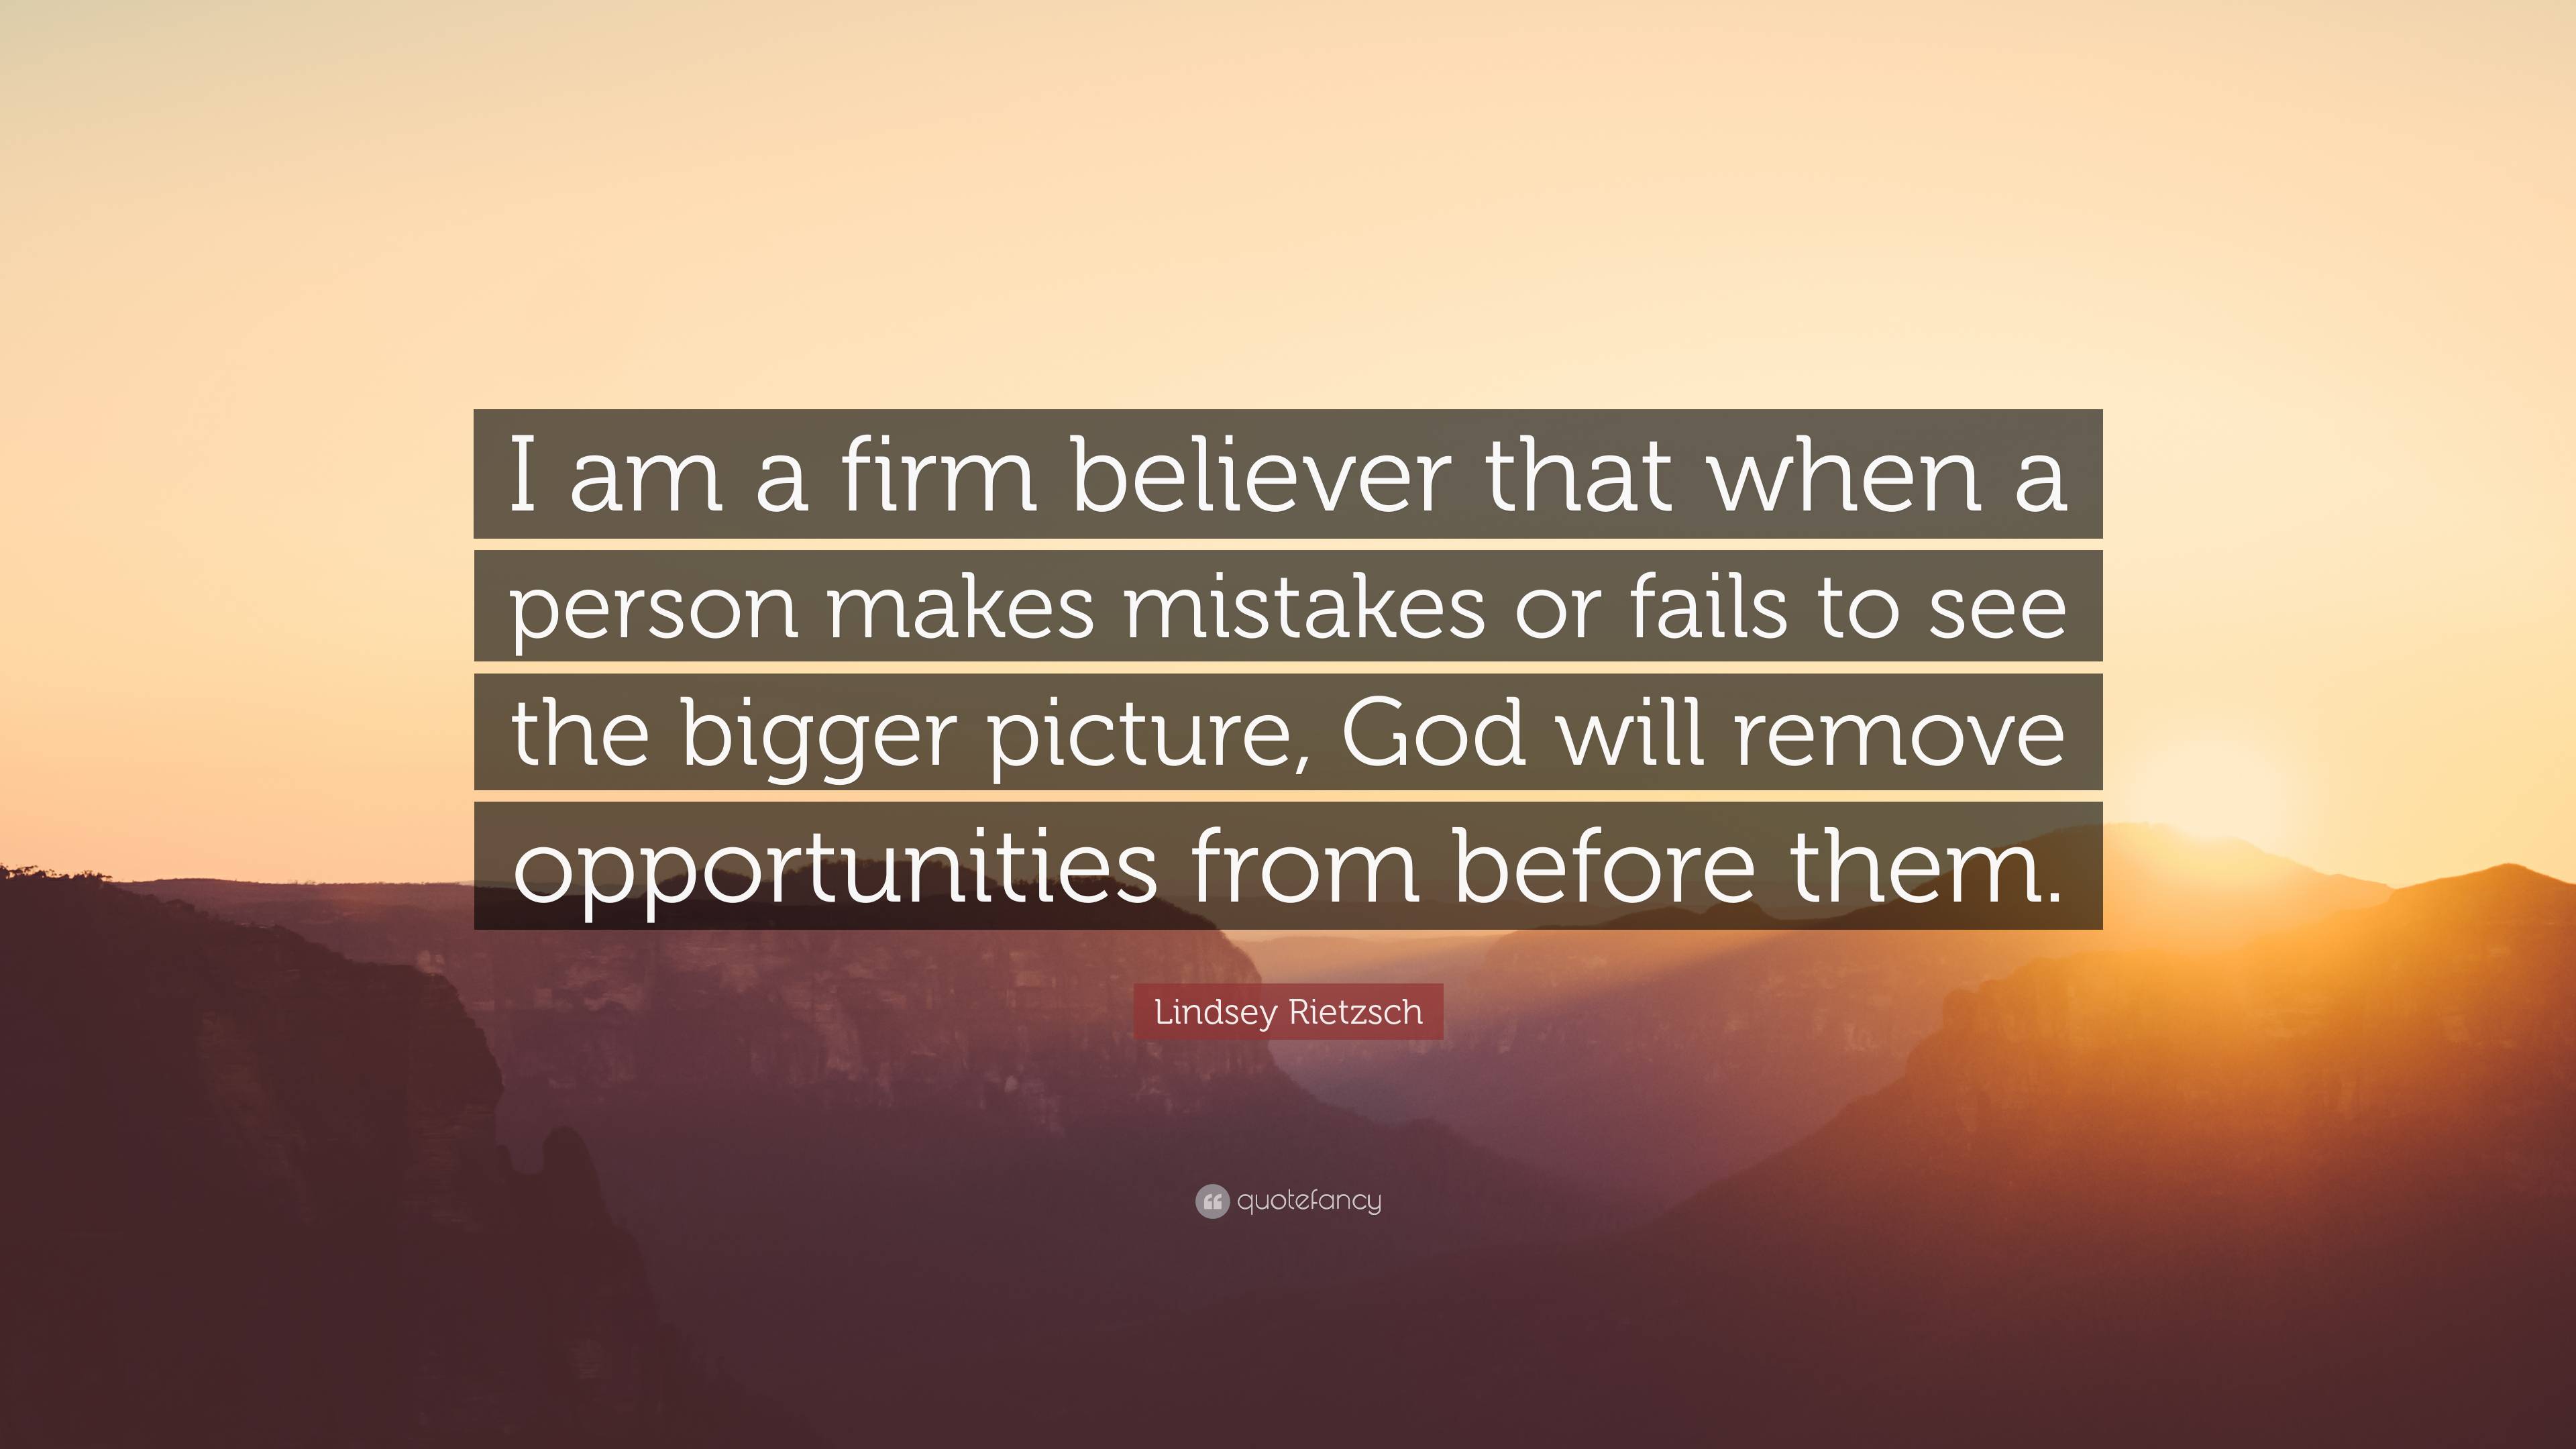 Lindsey Rietzsch Quote: “I am a firm believer that when a person makes  mistakes or fails to see the bigger picture, God will remove  opportunities”